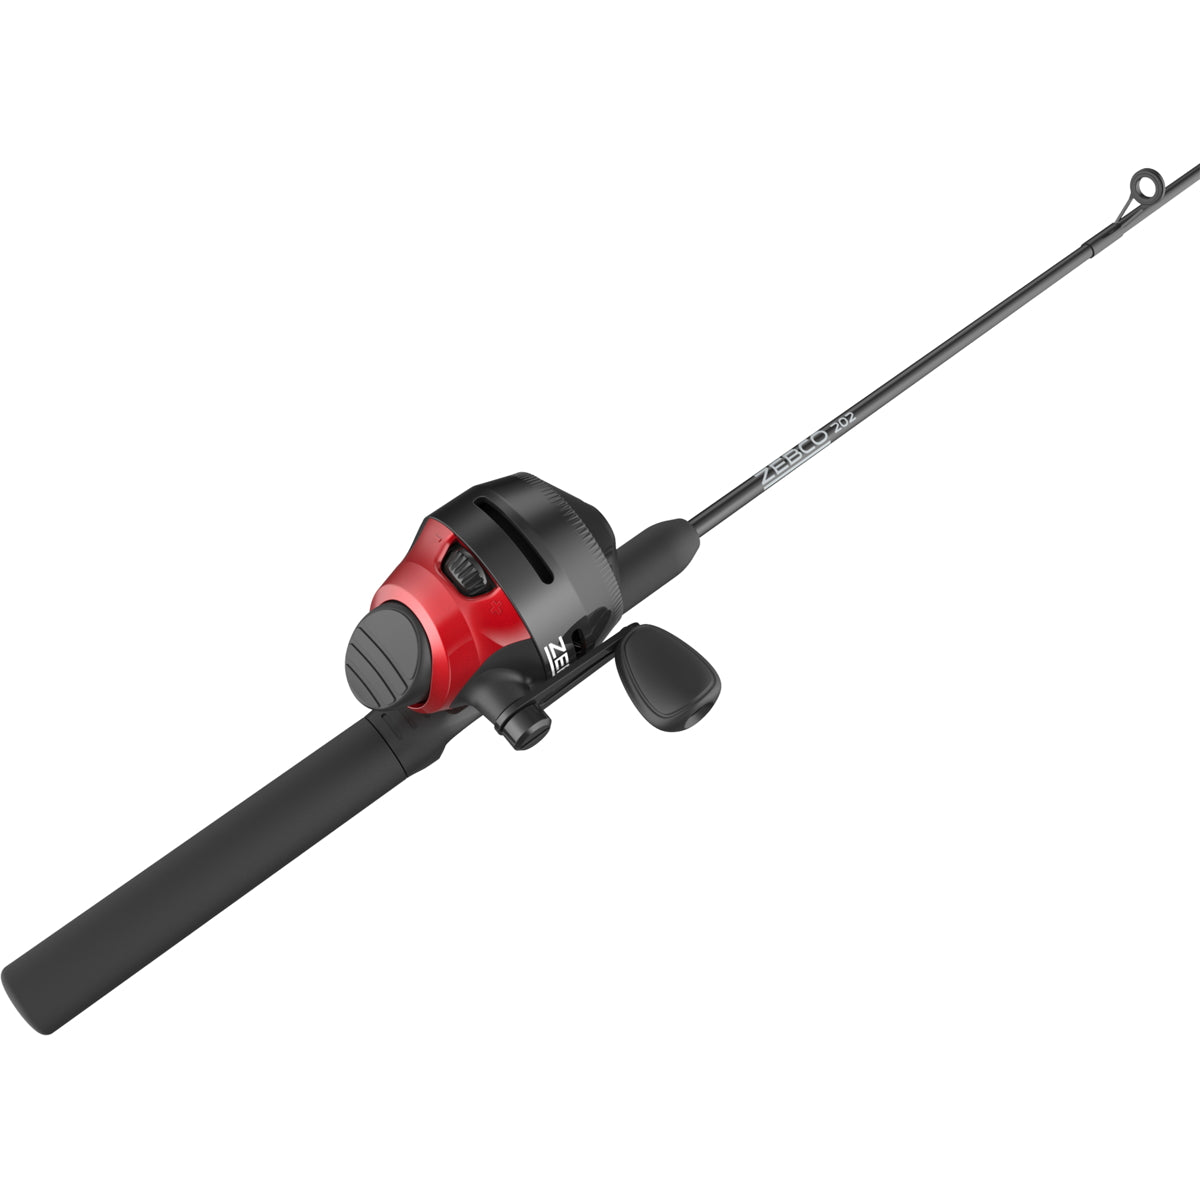 Photo of Zebco 202/562ML Spincast Combo with 56-Piece Tackle Kit for sale at United Tackle Shops.